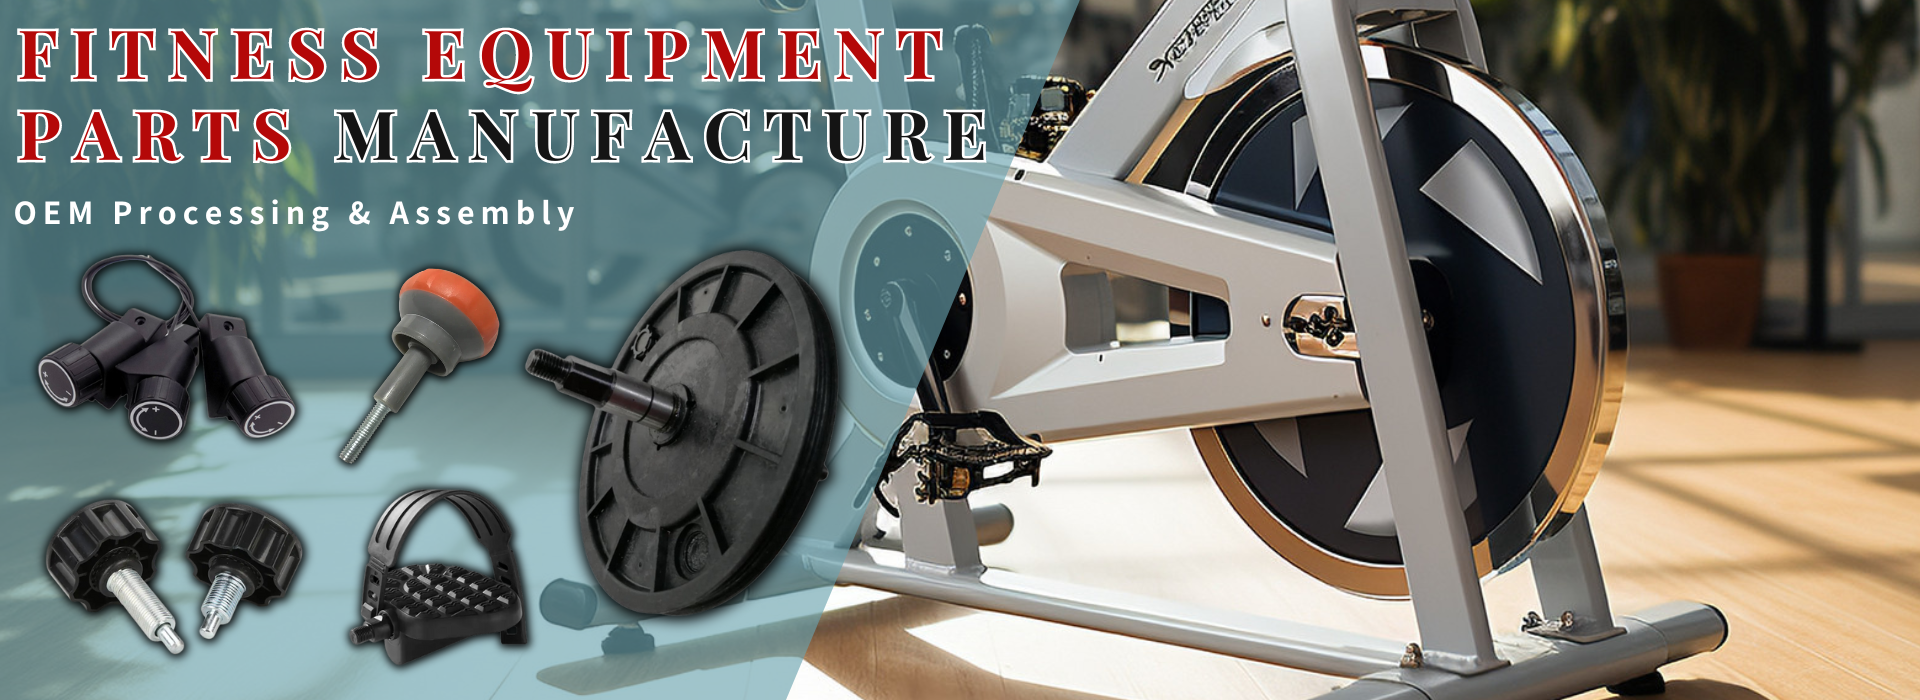 Fitness equipment parts processing